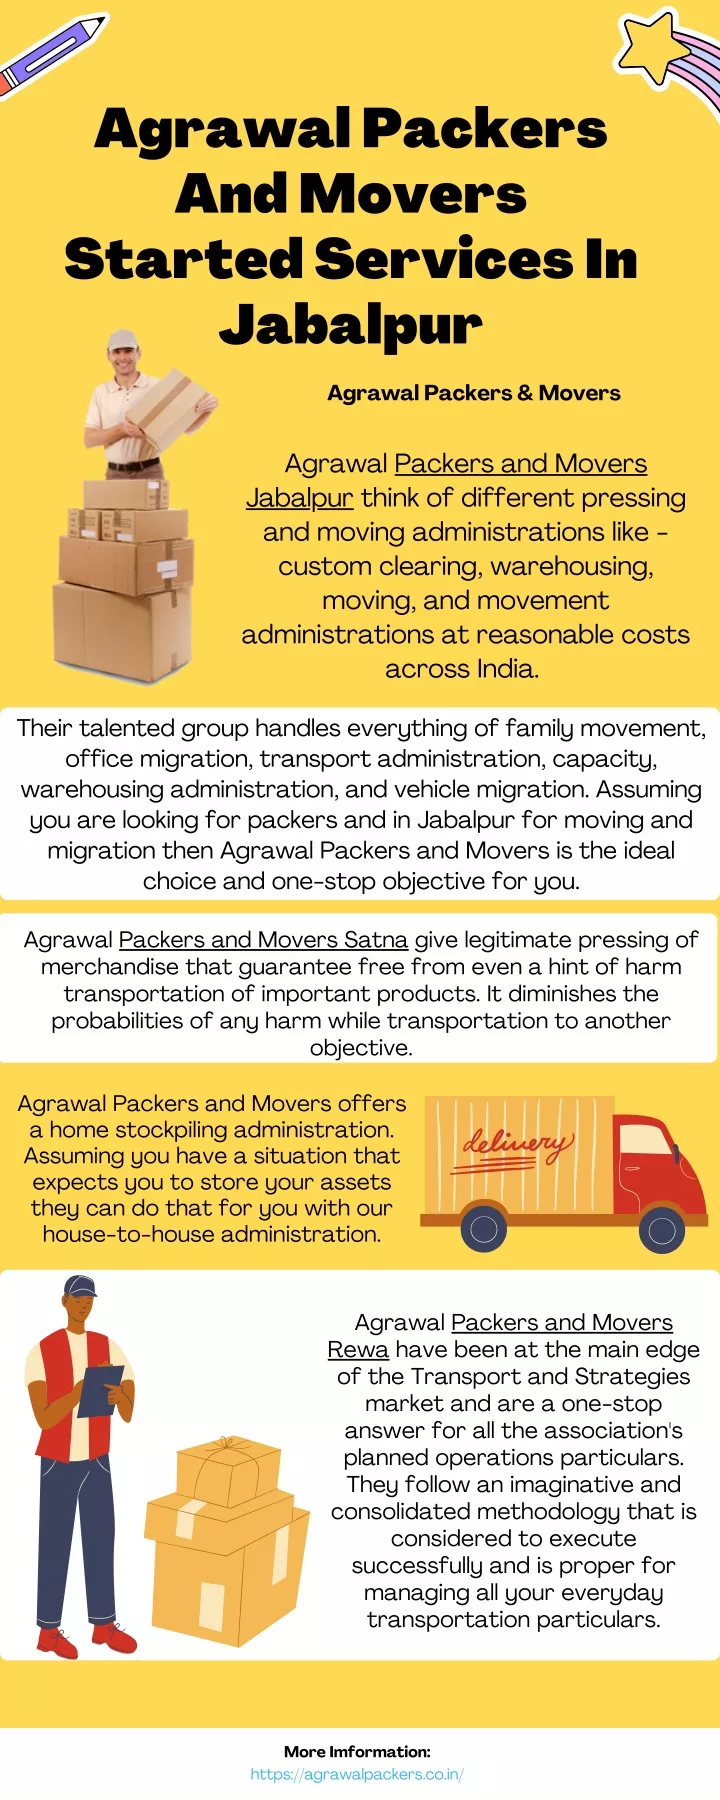 agrawal packers and movers started services